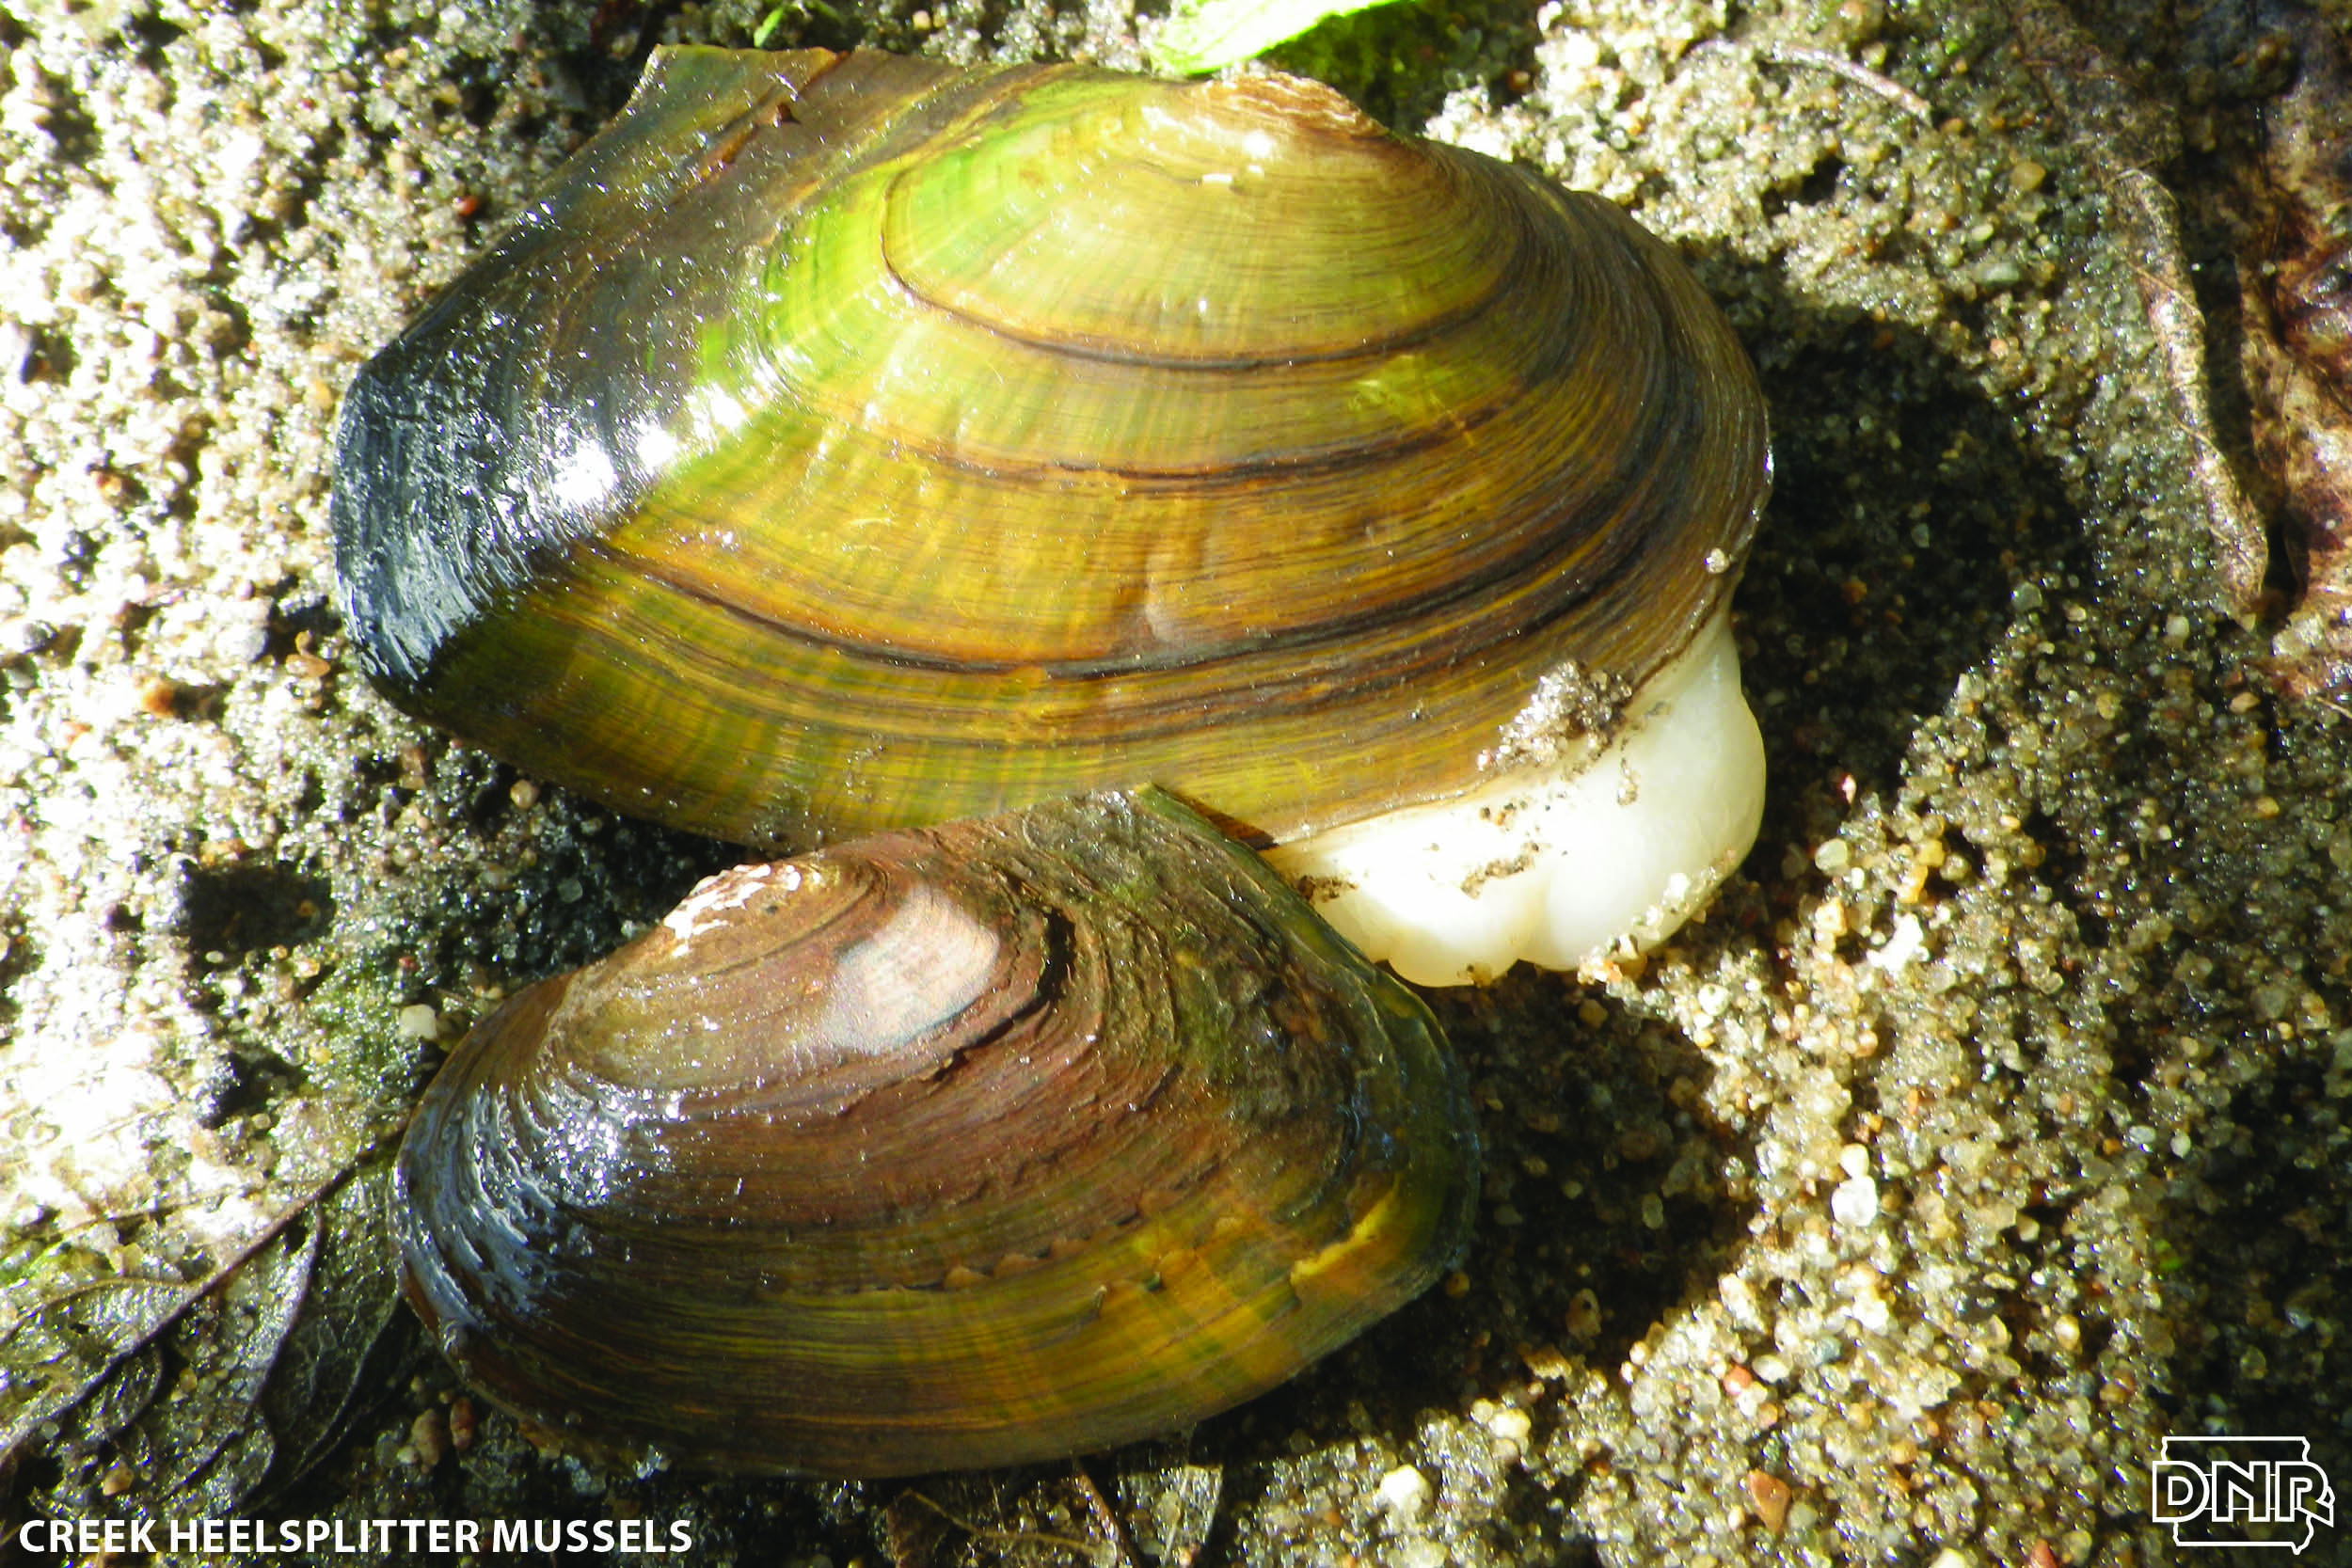 Cool things you should know about creek heelsplitters and other mussels | Iowa DNR